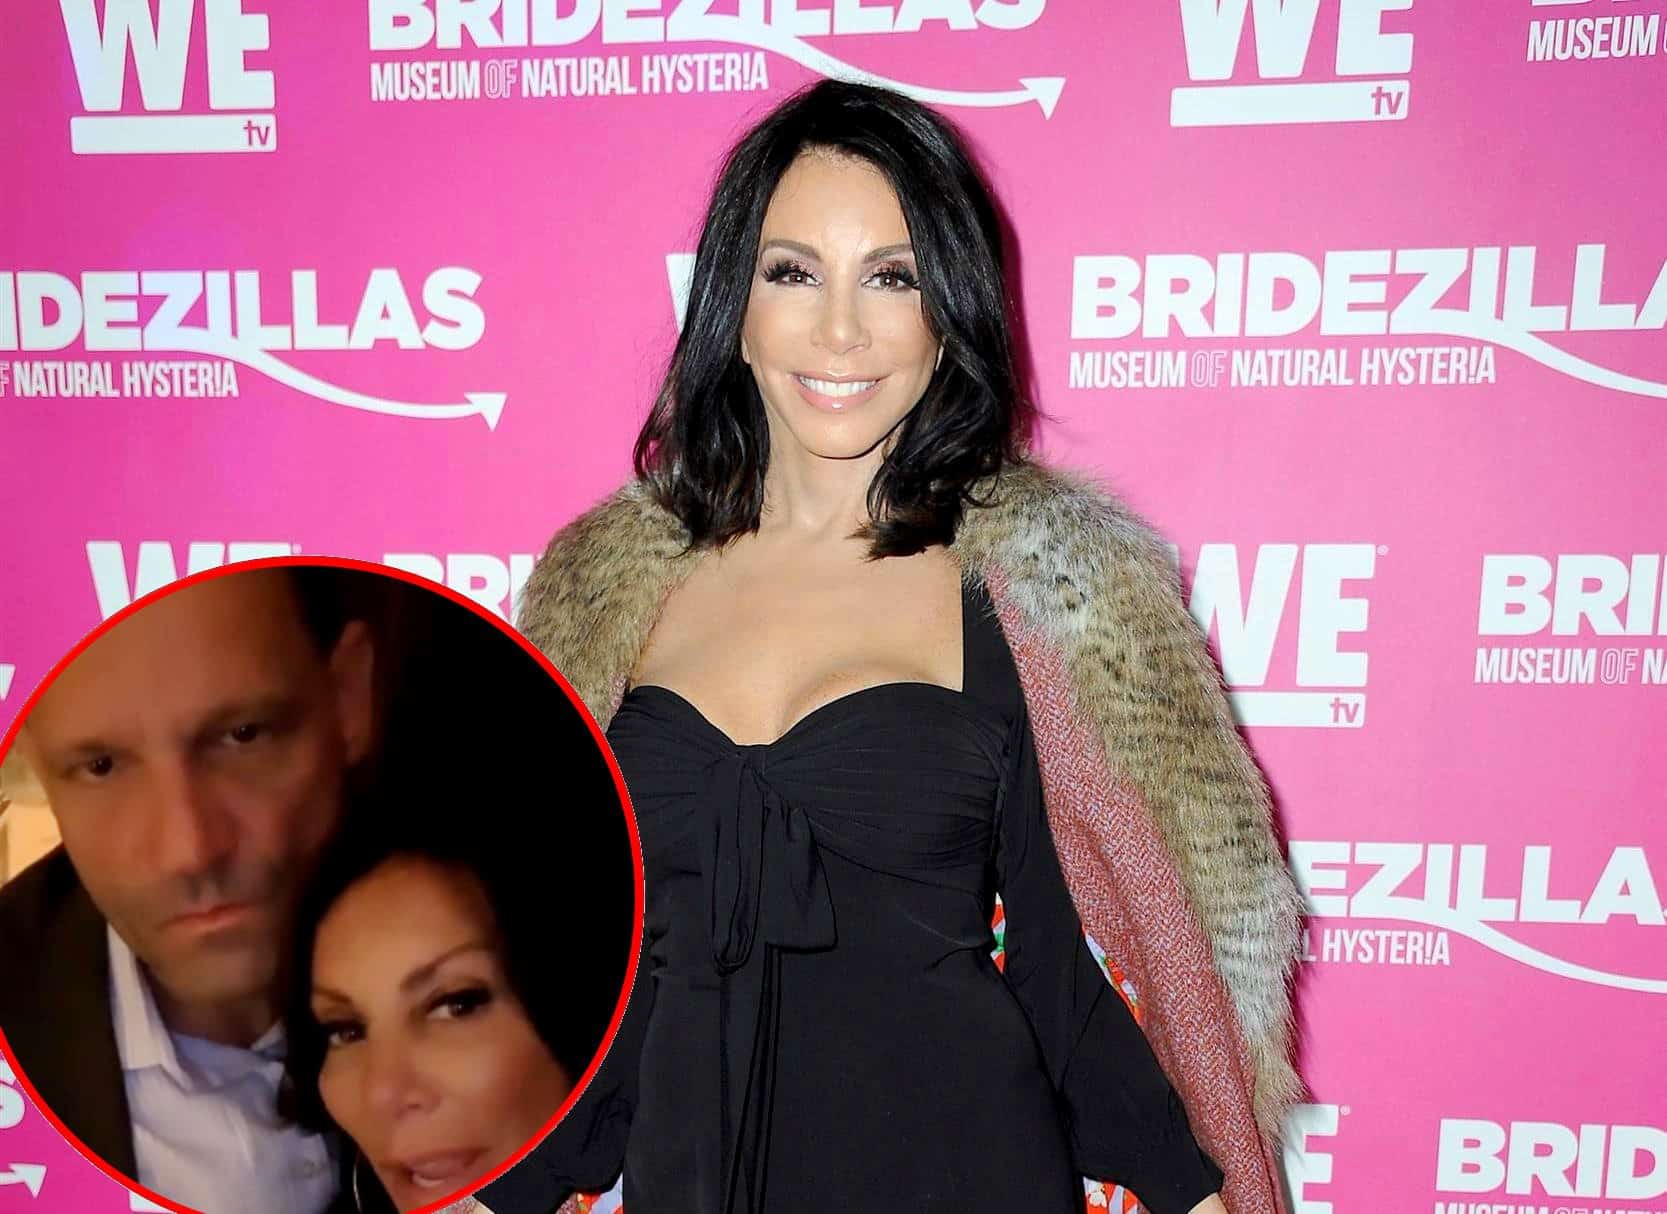 Danielle Staub Reveals If She's Returning to RHONJ for Season 10! Plus Is She Drugging Fiancé Oliver Maier and Isolating Him from Family While Spending His Money?